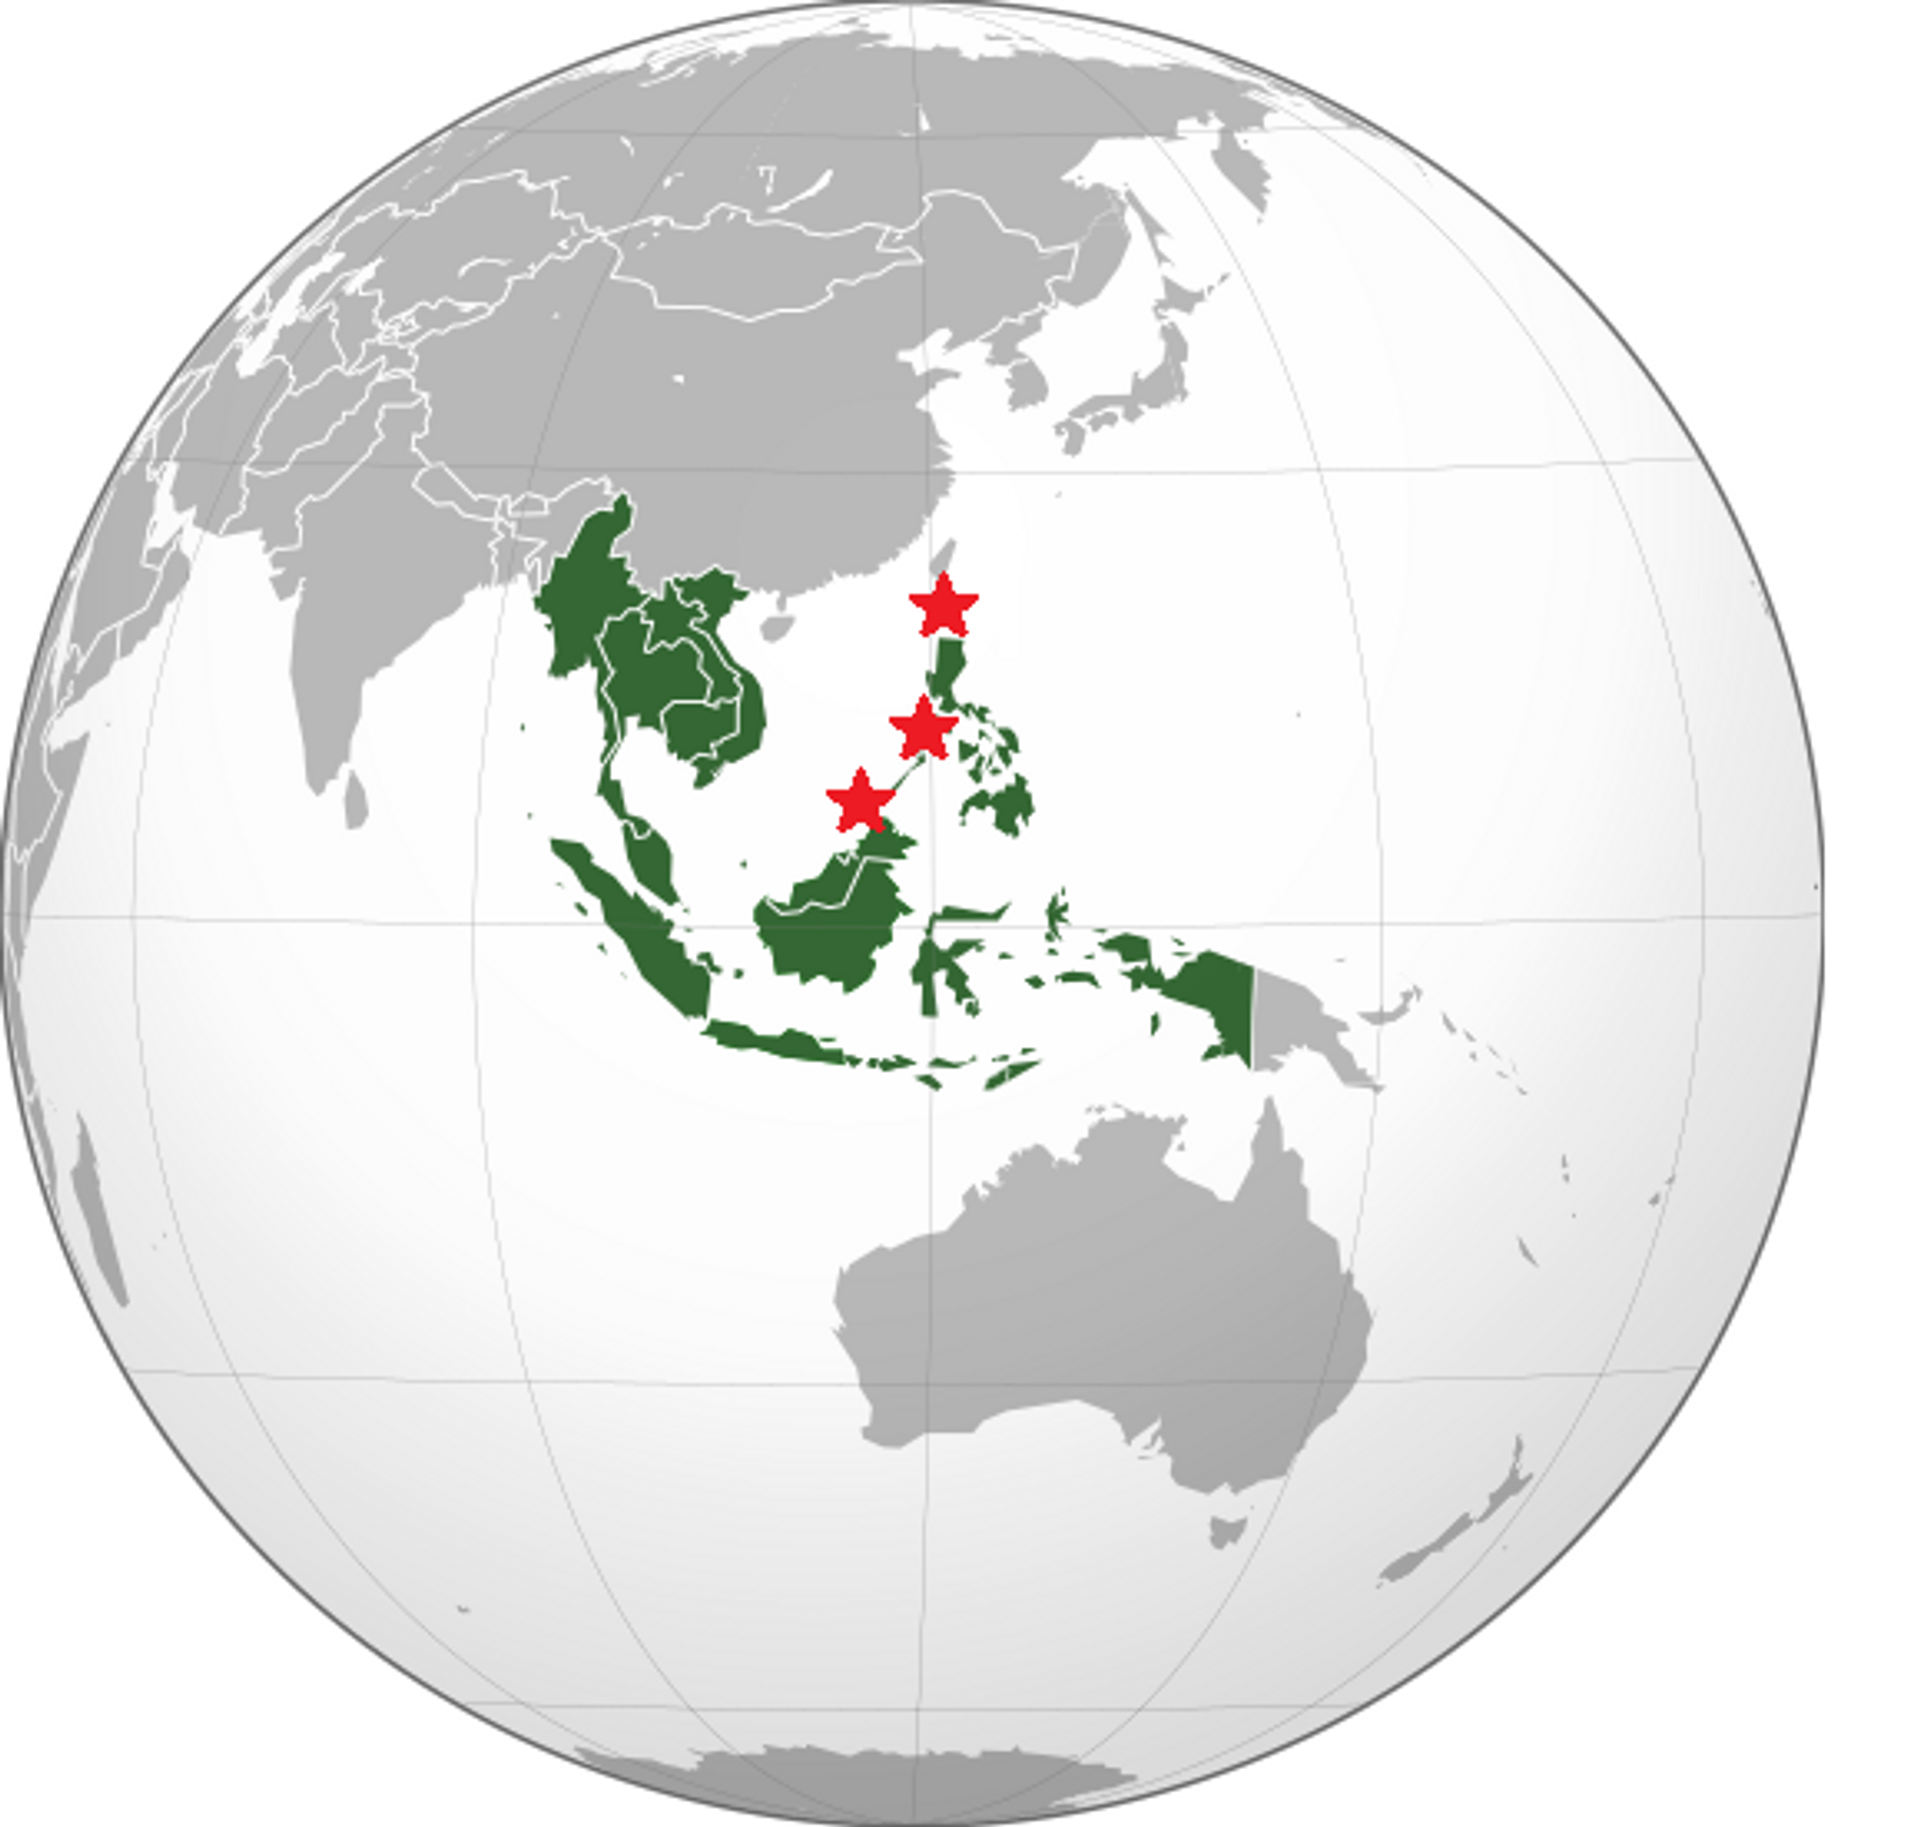 Map of Southeast Asia (green) showing strategic maritime choke points which could cut off China's access to the world's oceans via the Philippines in the event of a US-China conflict. - Sputnik 日本, 1920, 17.02.2023